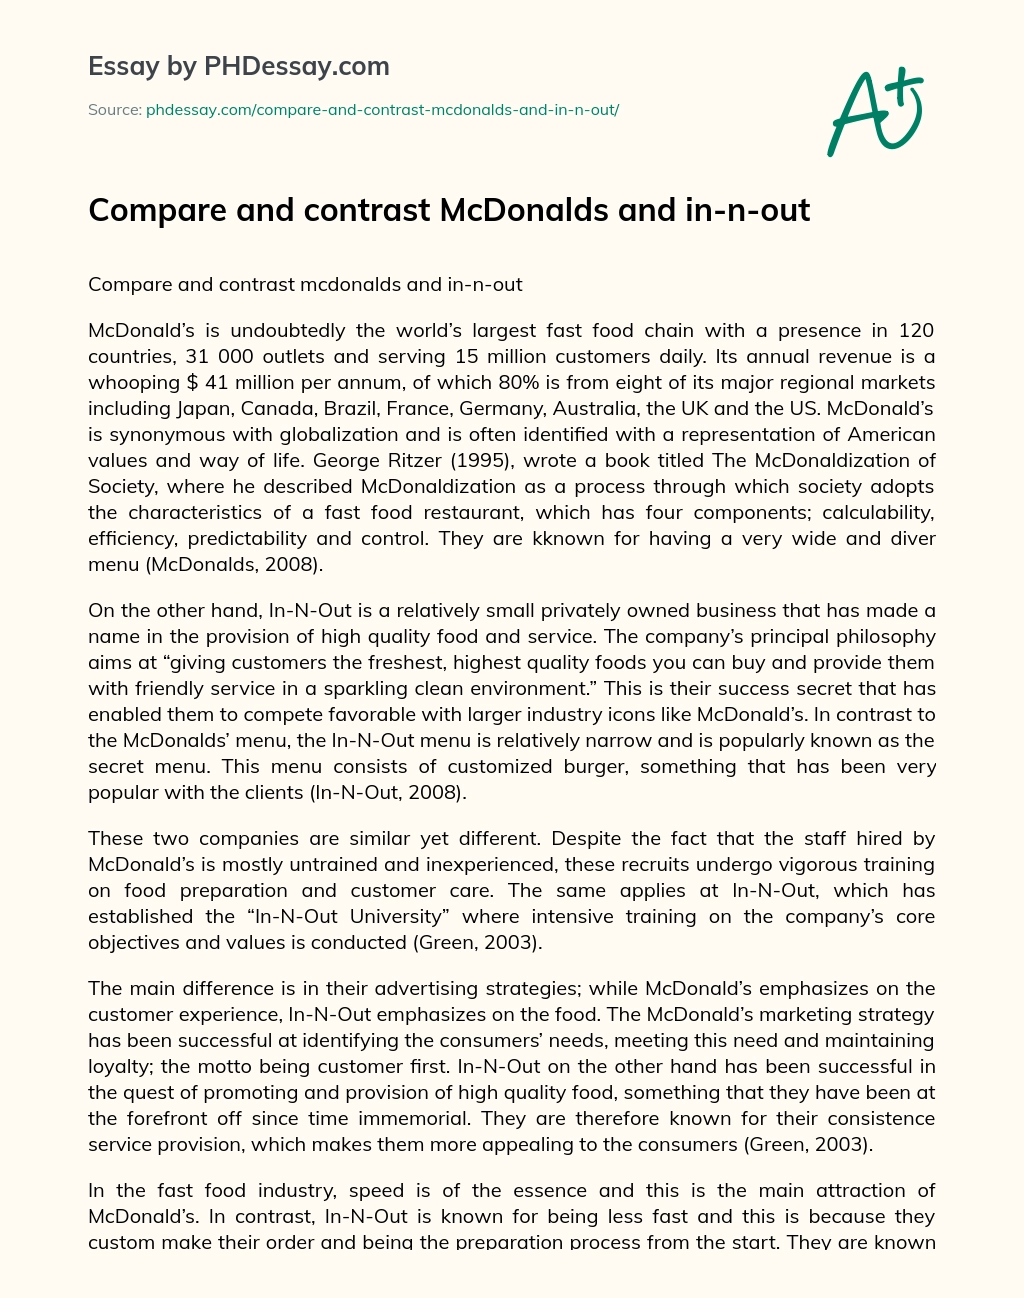 Compare and Contrast McDonalds and In-N-Out essay